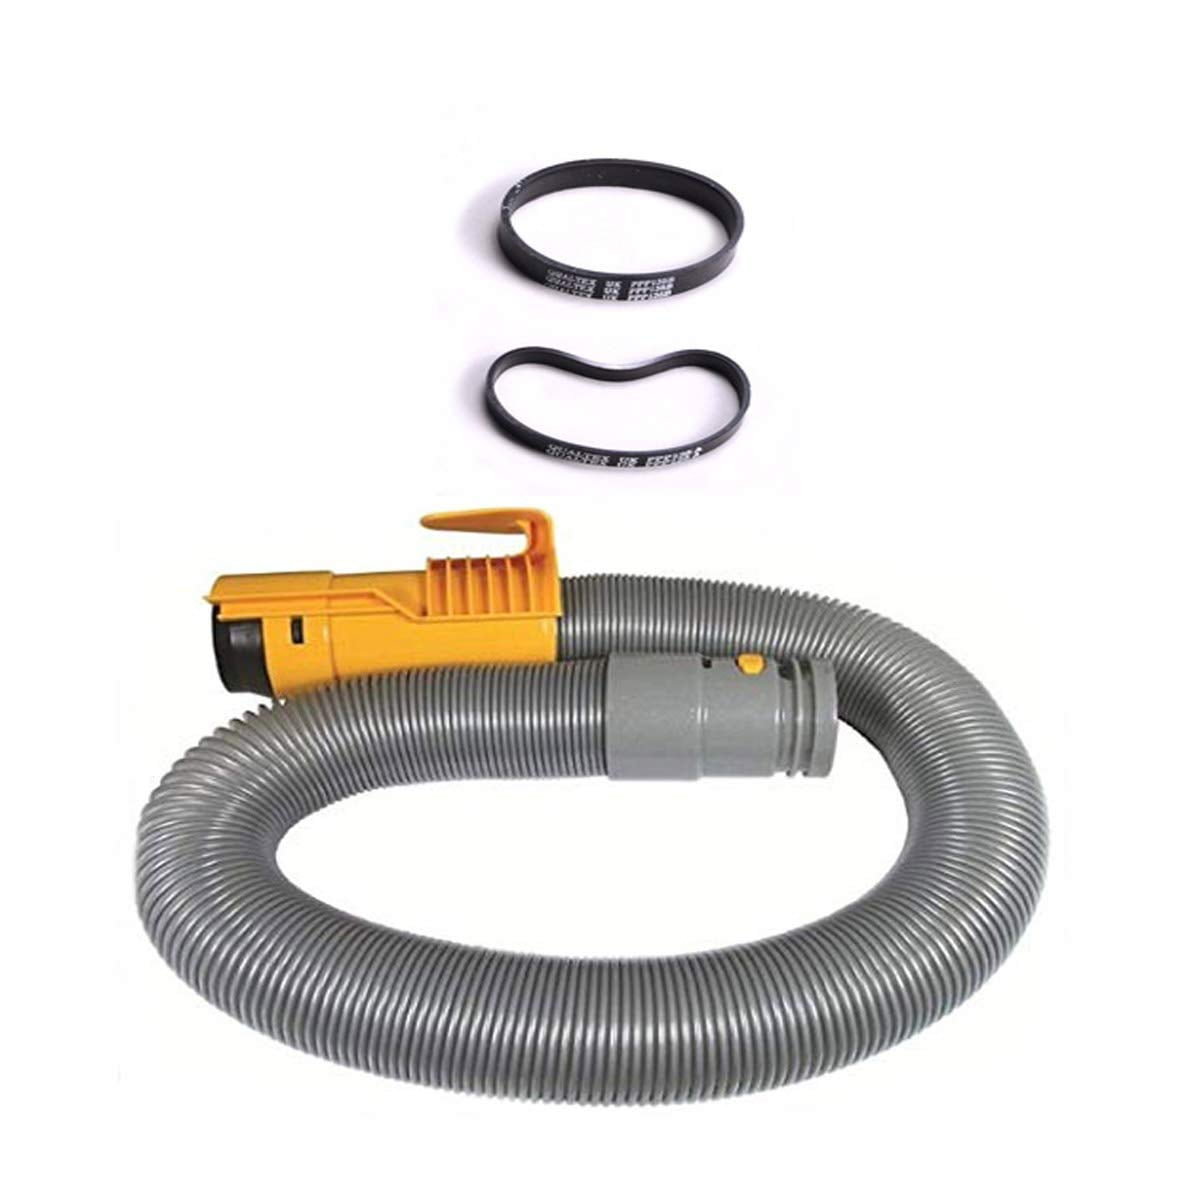 Dyson 10-1100-03 Vacuum Cleaner End Hose with 10-3106-06 Clutch 2 Belts Dyson Vacuum Cleaner Fit For Models DC07, DC-07 -